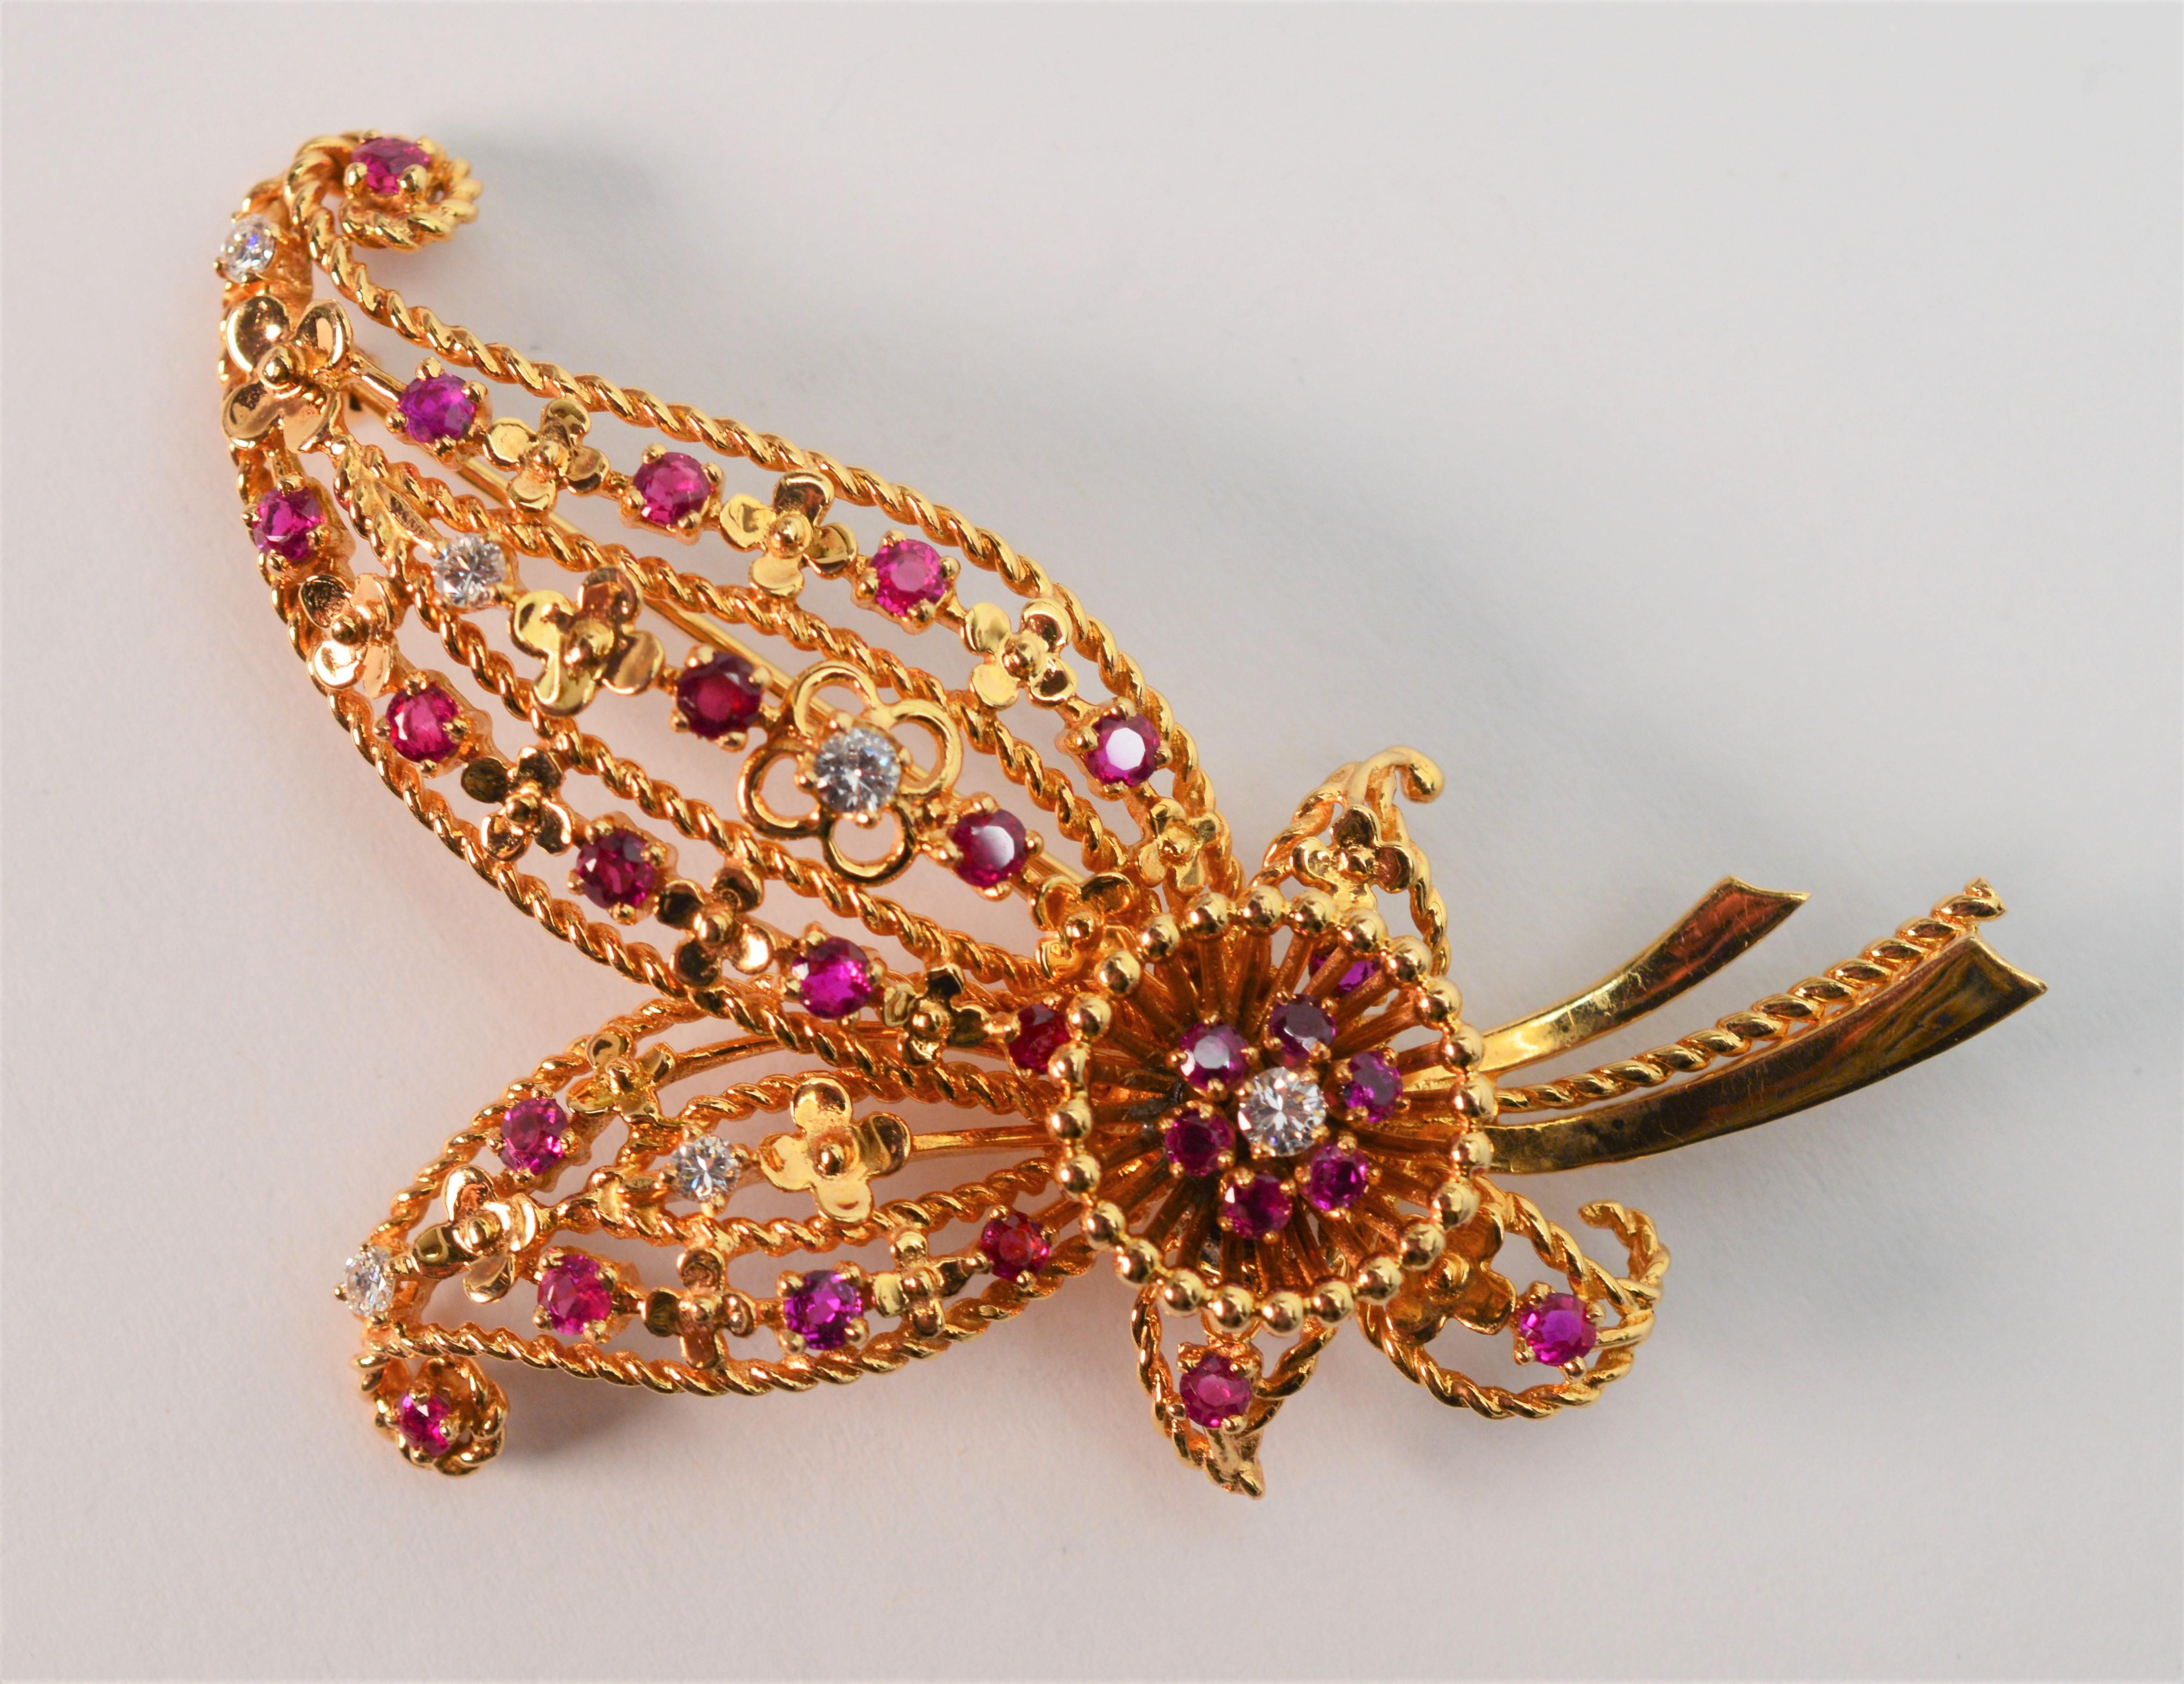 Bright and cheerful describes this colorful finely crafted 2-1/2 inch brooch that is the perfect accessory to accent a lapel or hat.  Swirls of textured 14K gold filigree in a bouquet inspired shape are hosts for the multiple round faceted ruby and